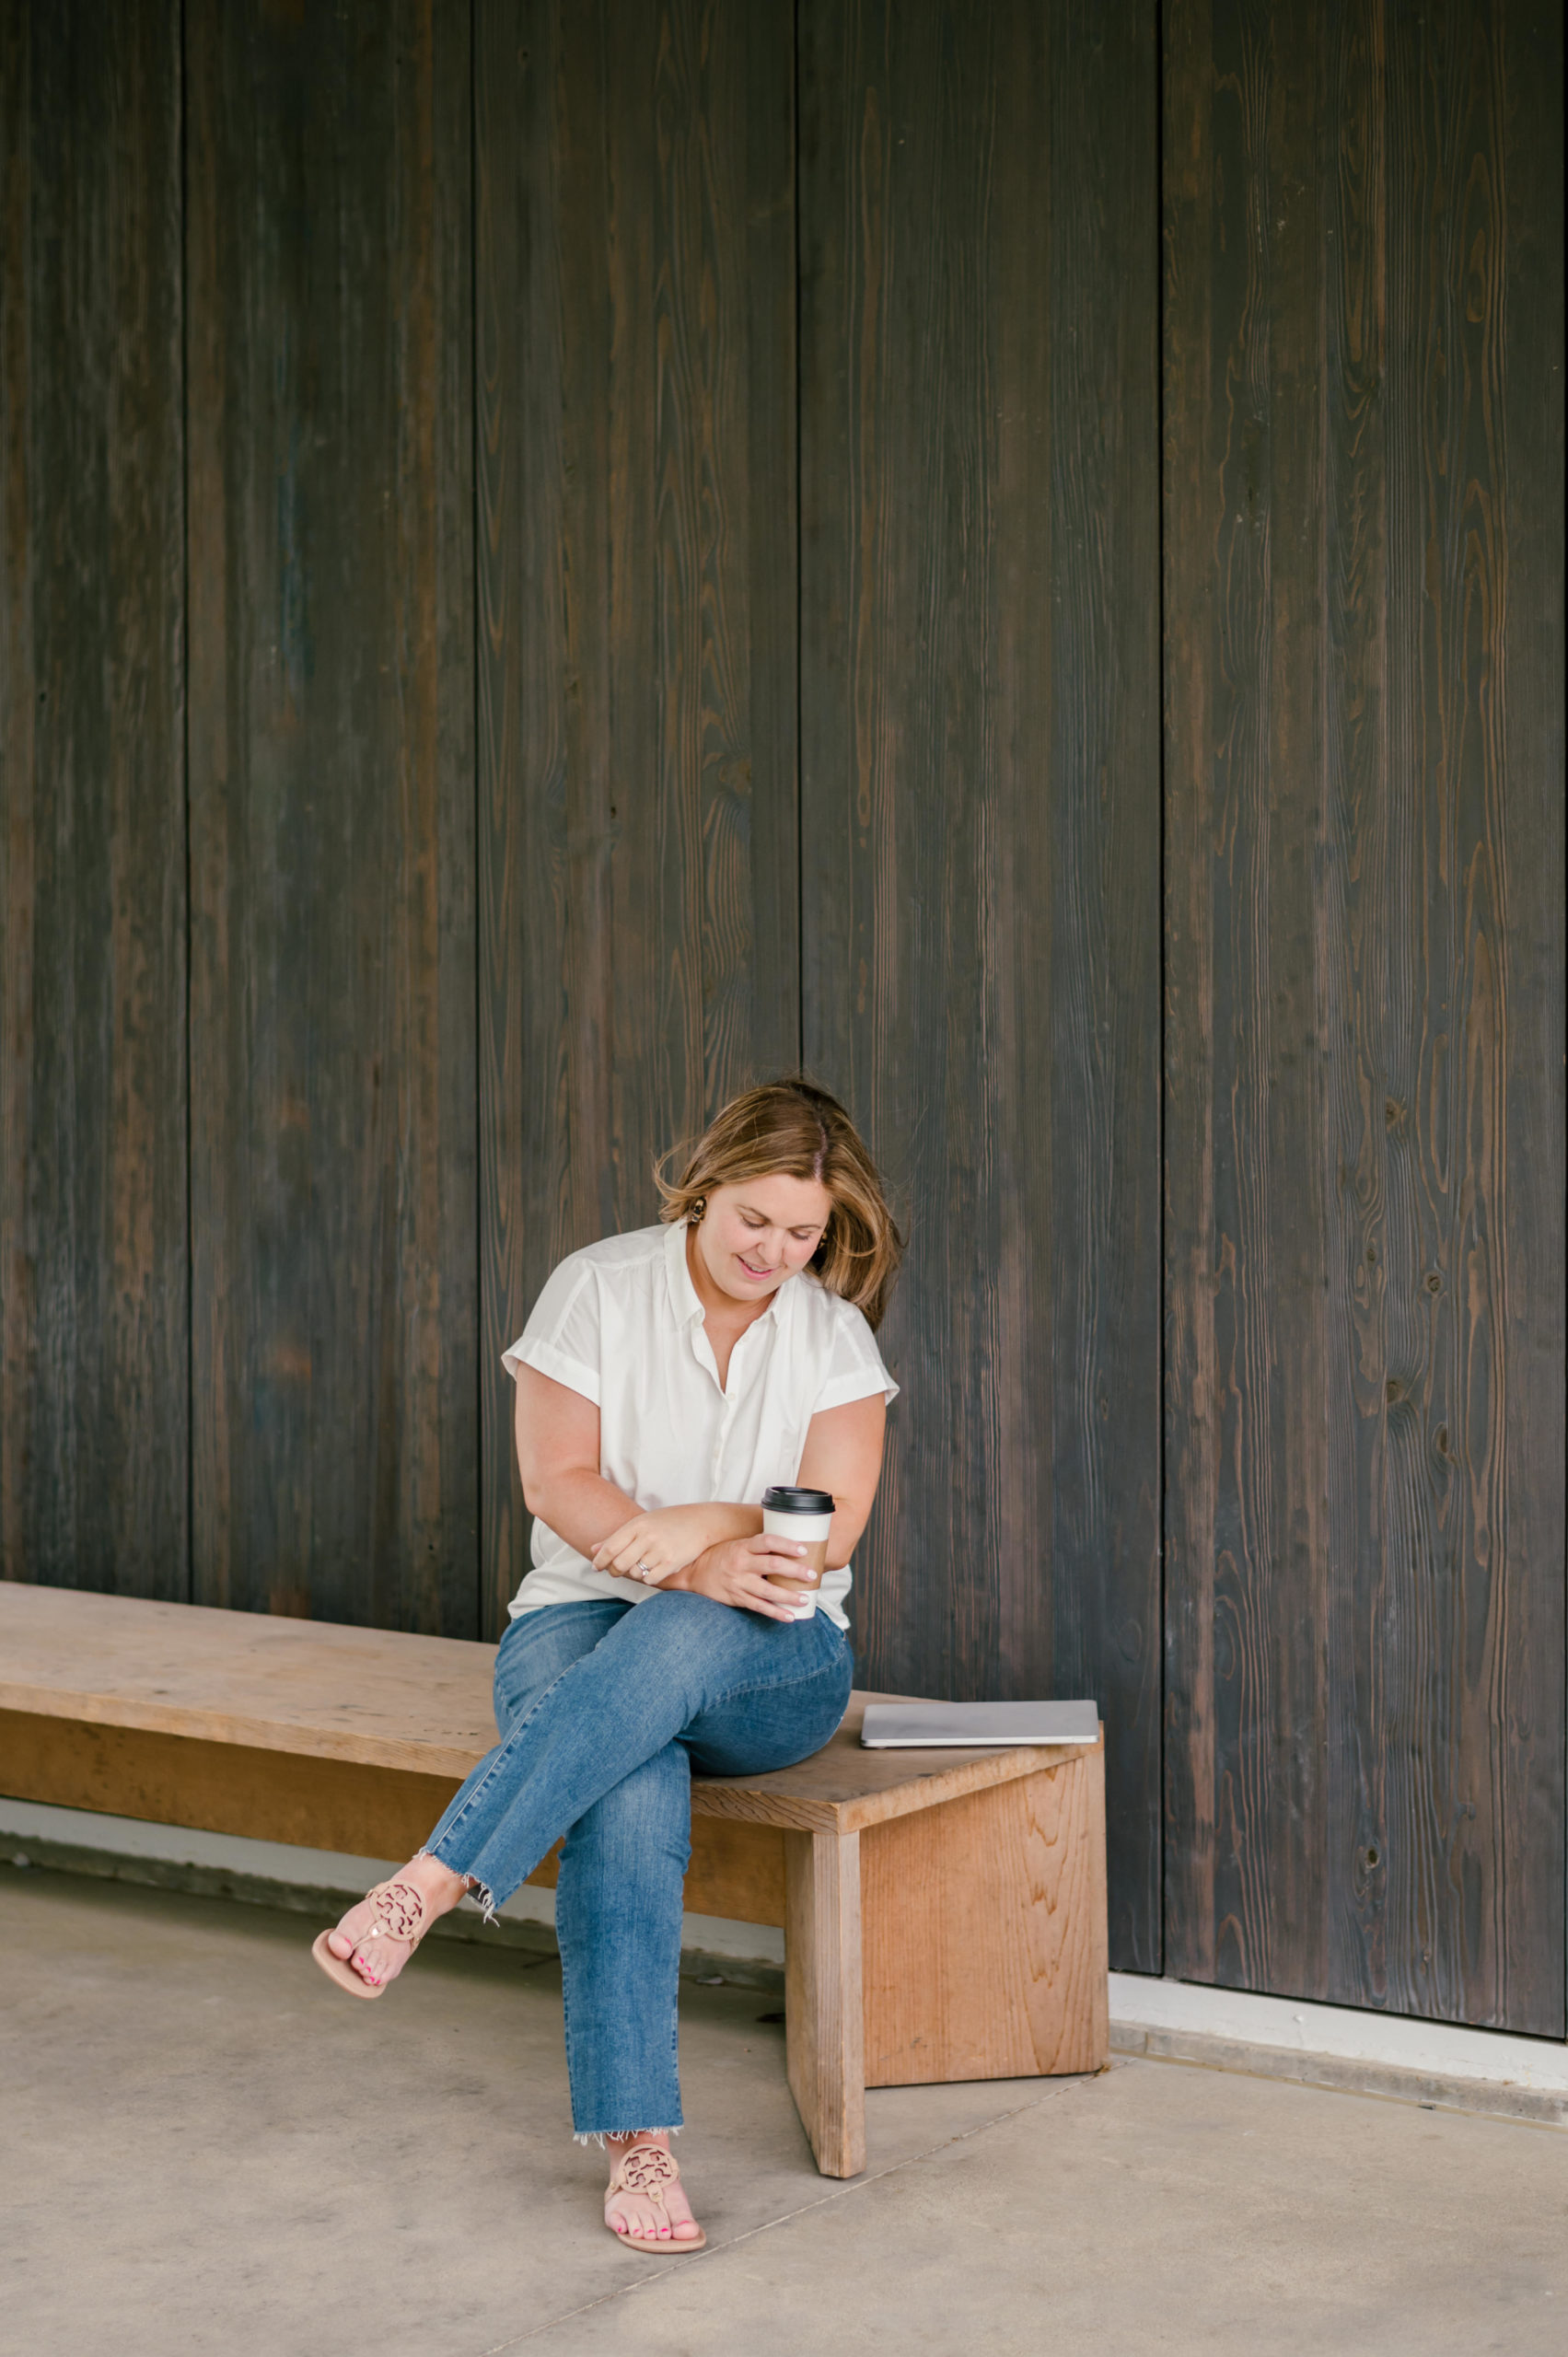 Woman sitting on a wooden bench holding a cup of coffee smiling